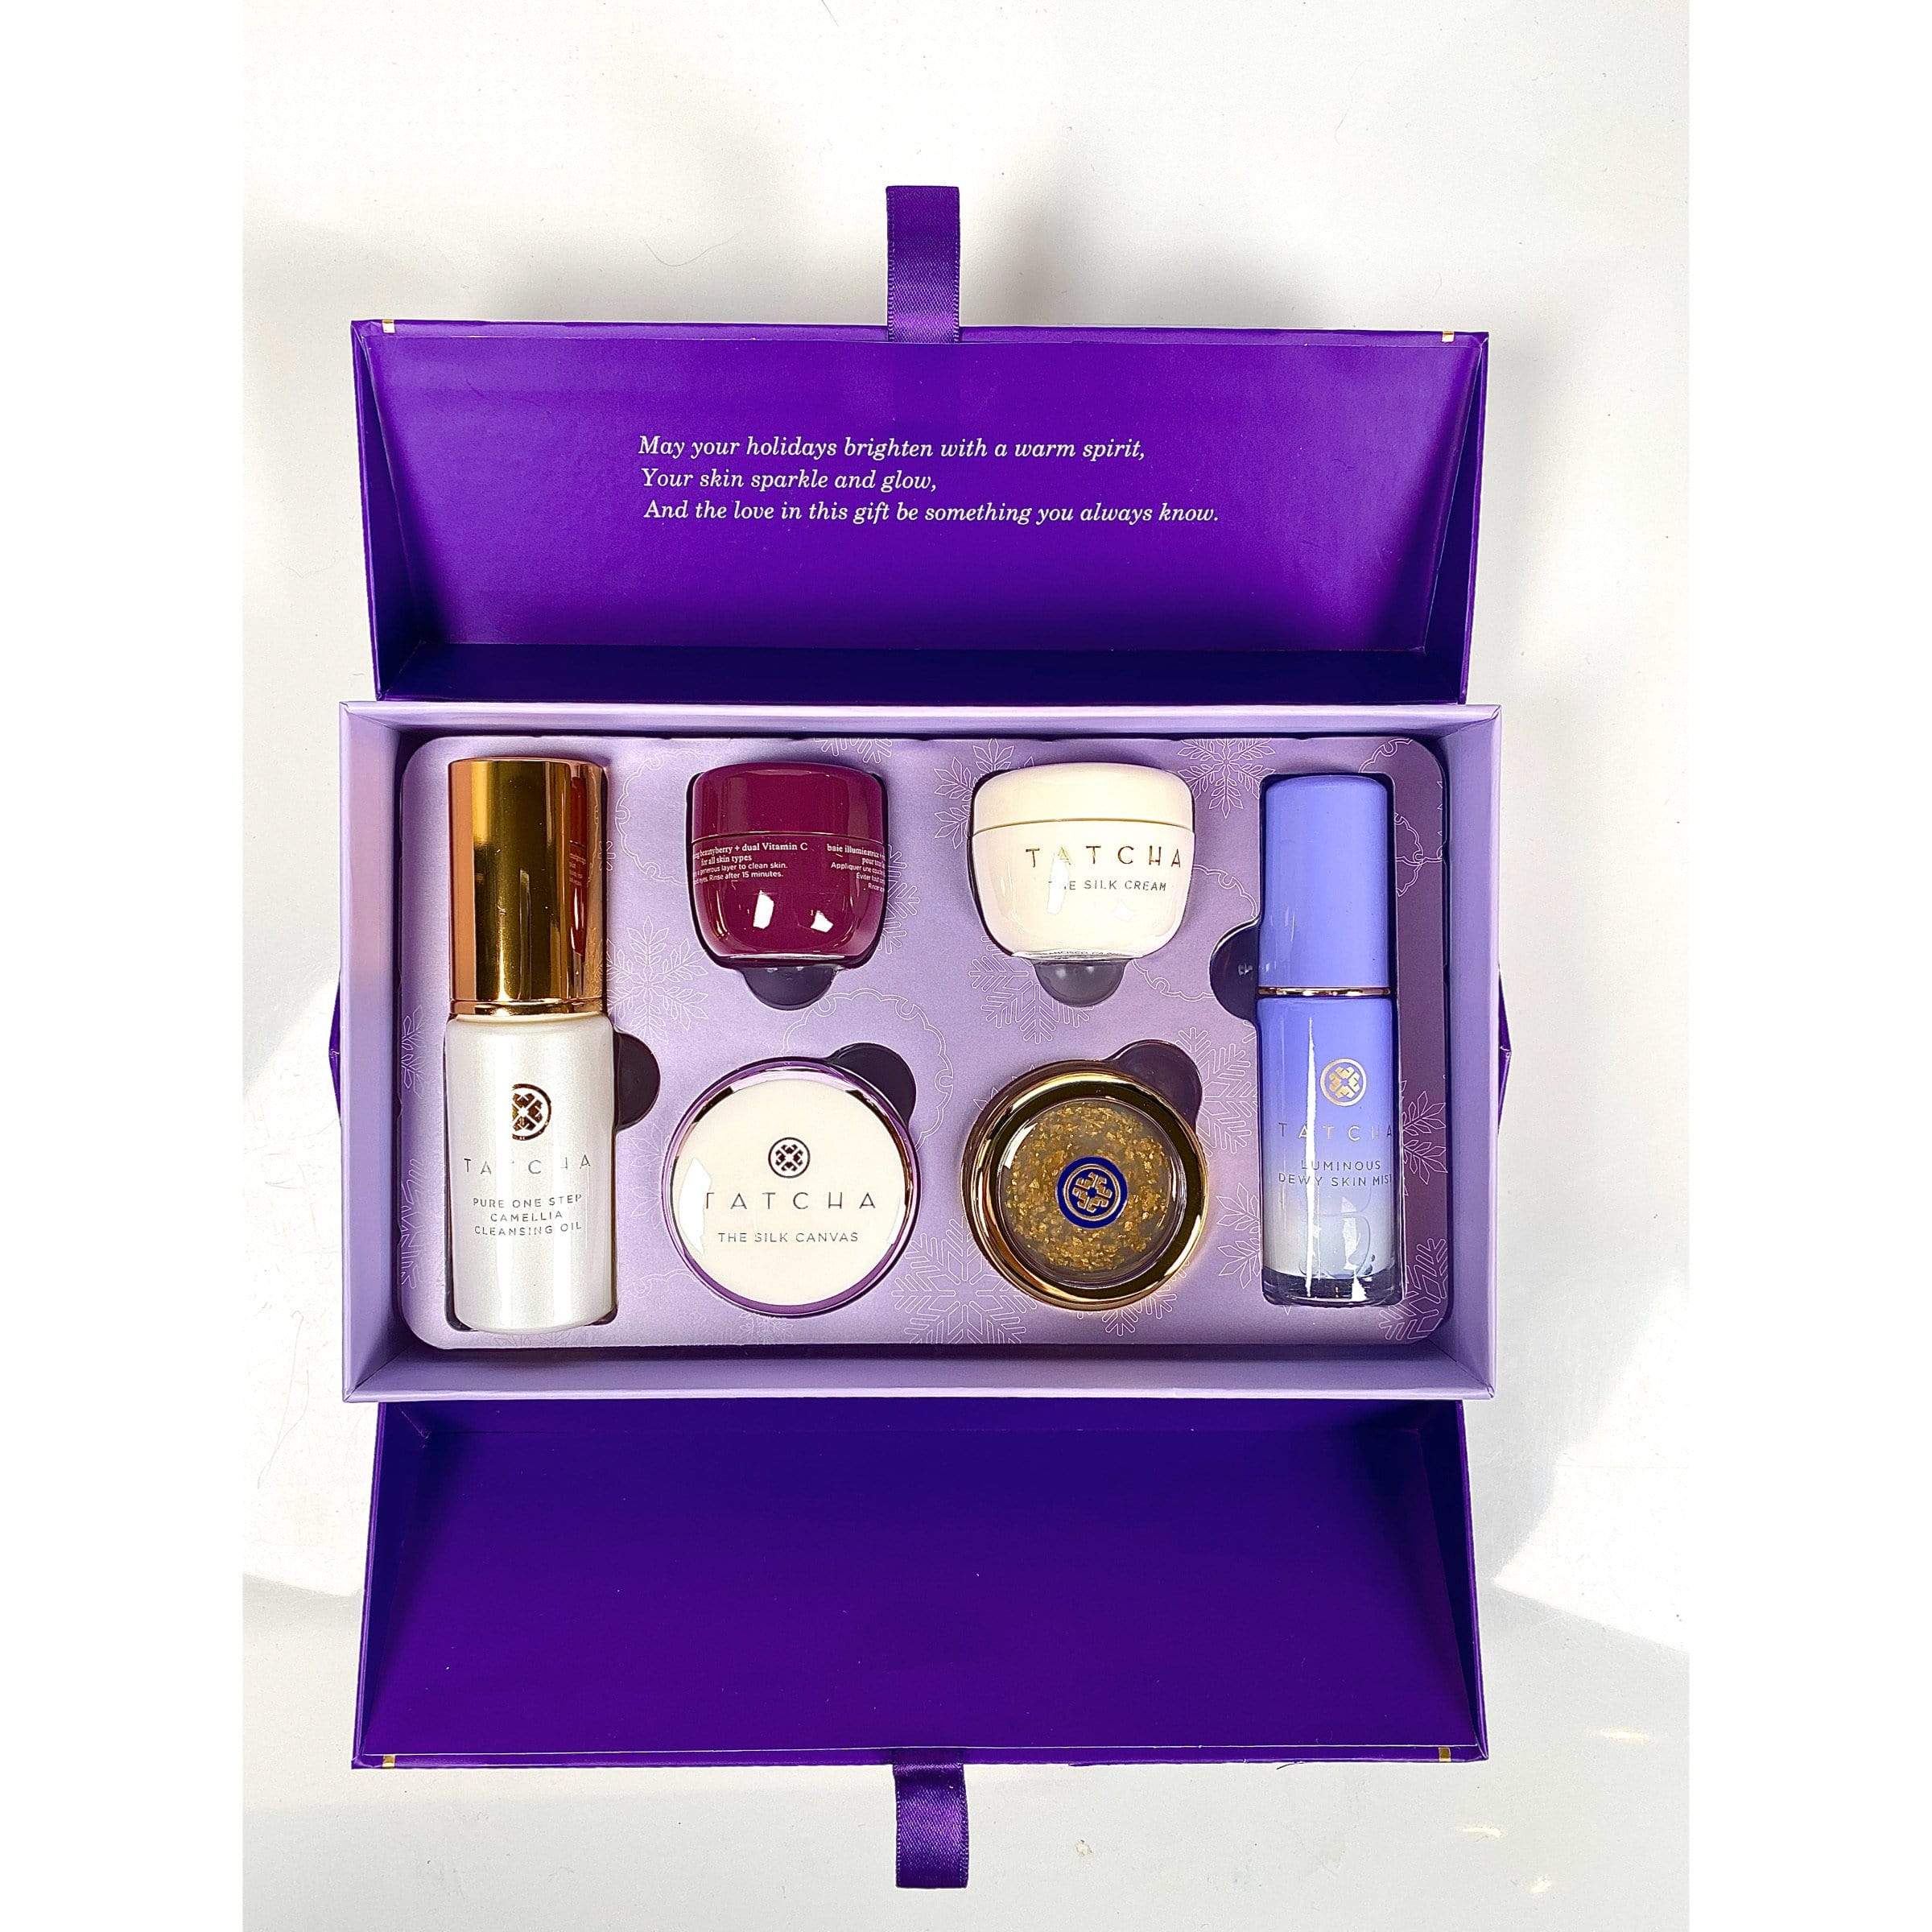 Image result for tatcha hd little luxuries obento box